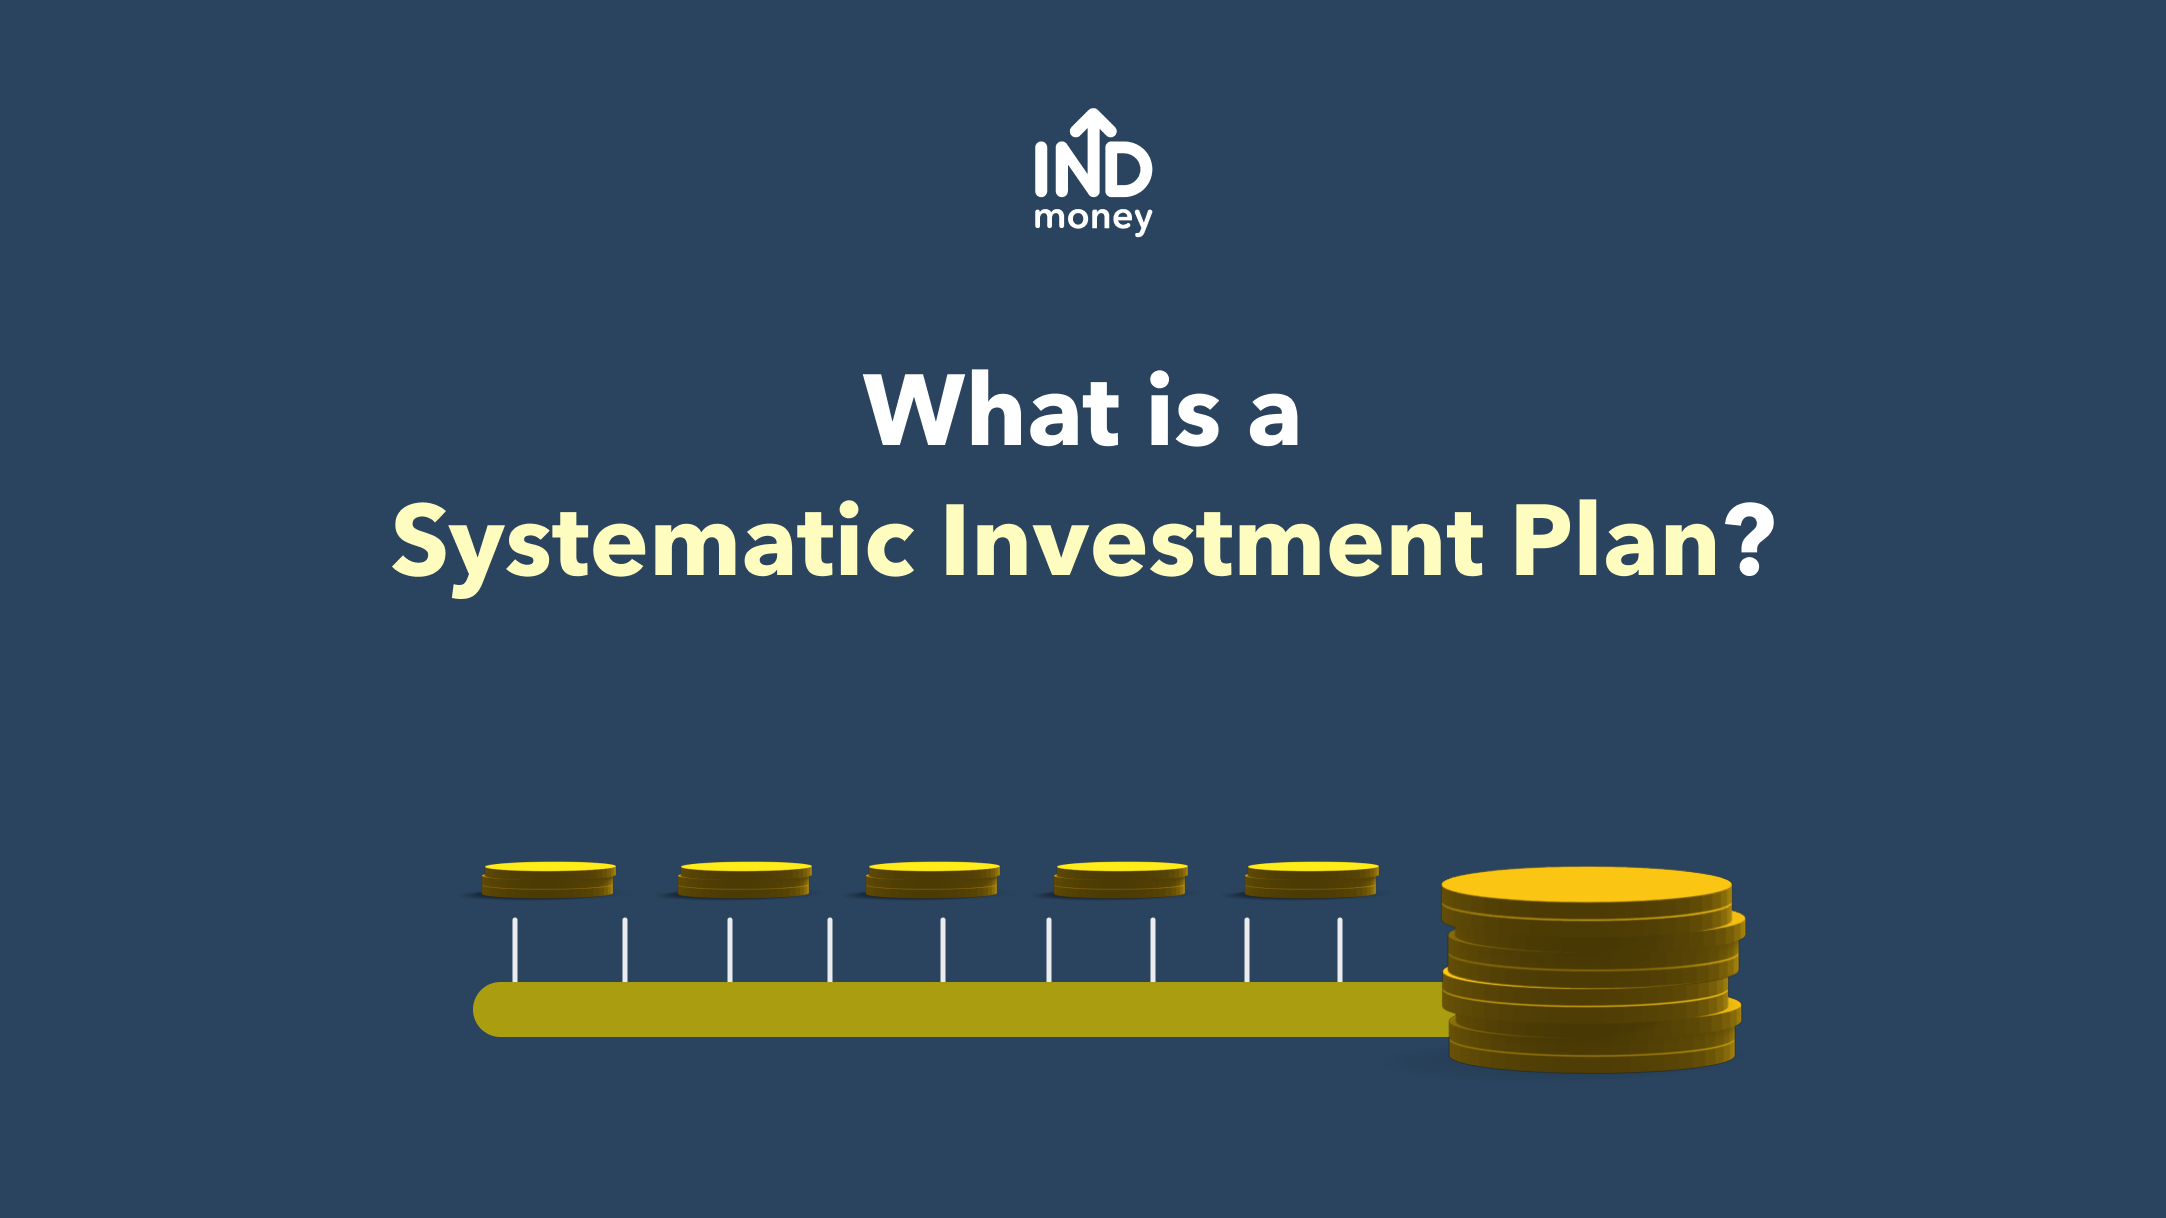 Systematic Investment Plan (SIP): What is SIP in Mutual Fund? | INDmoney